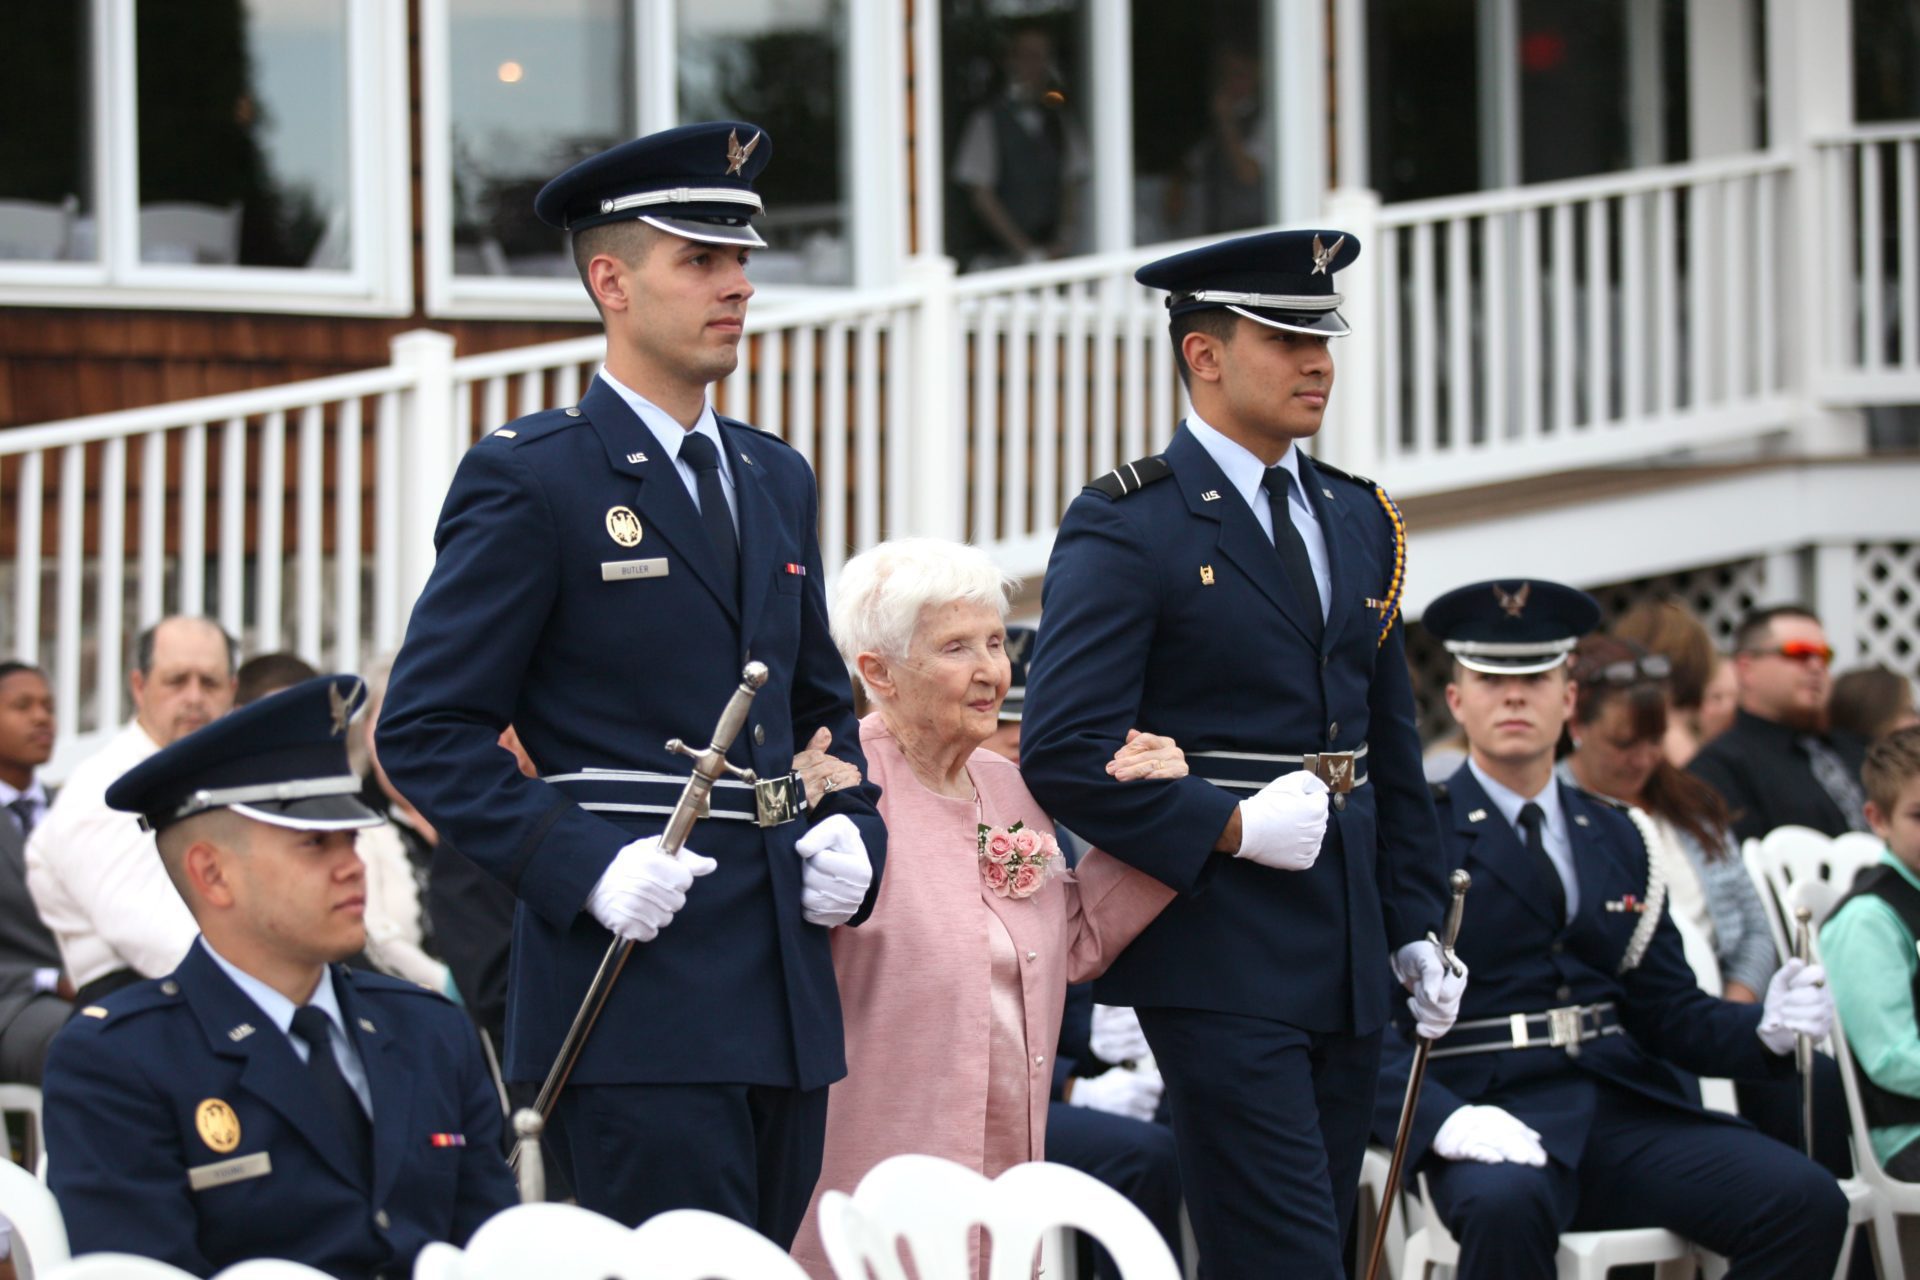 Grandmother escorted by military during tea party theme wedding